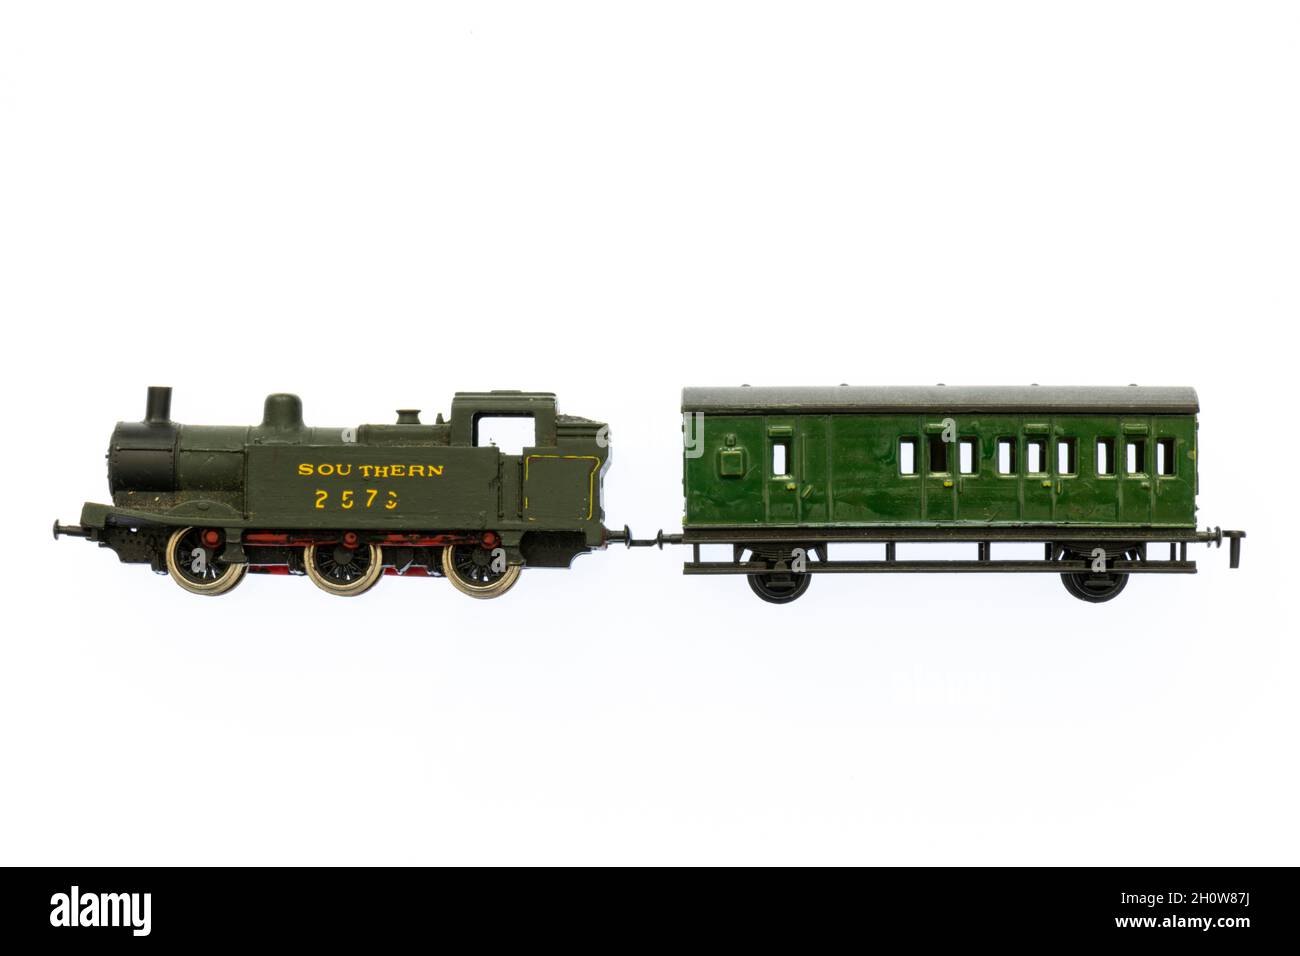 model railway toy train in green southern railway livery. model railways steam train and carriage against a plain white background. model train set. Stock Photo